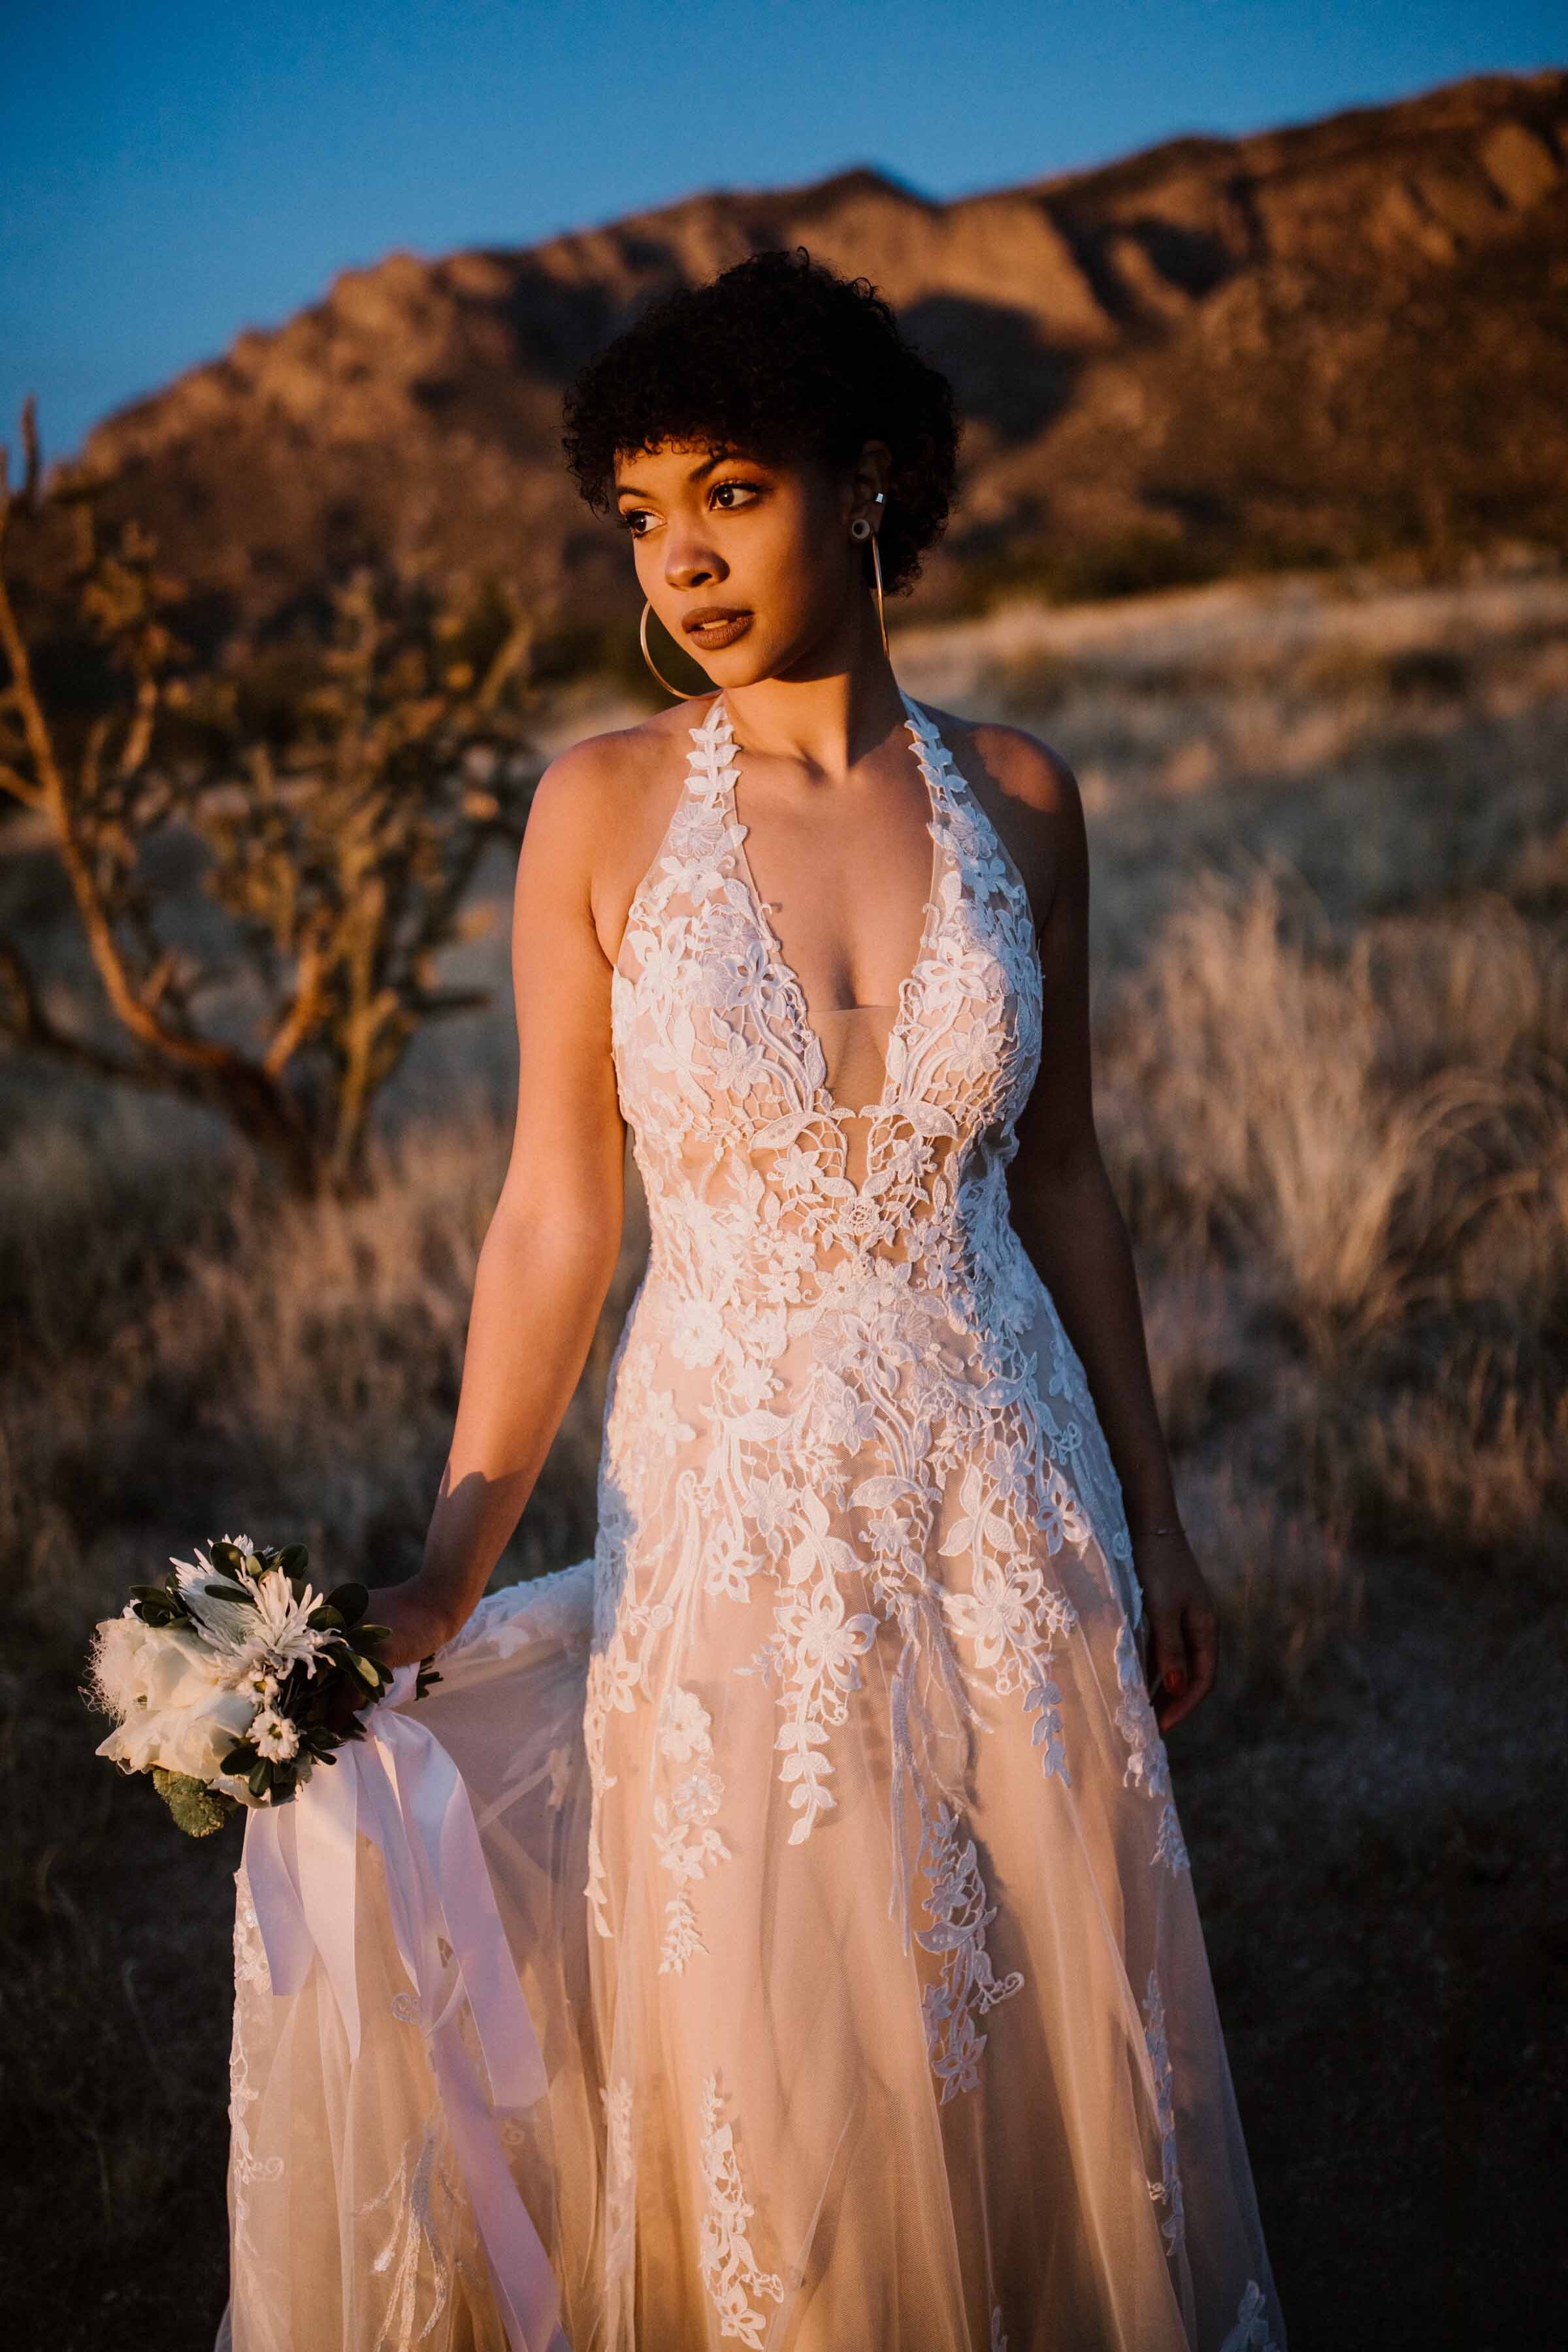 Wedding dress with plunging neckline and lace